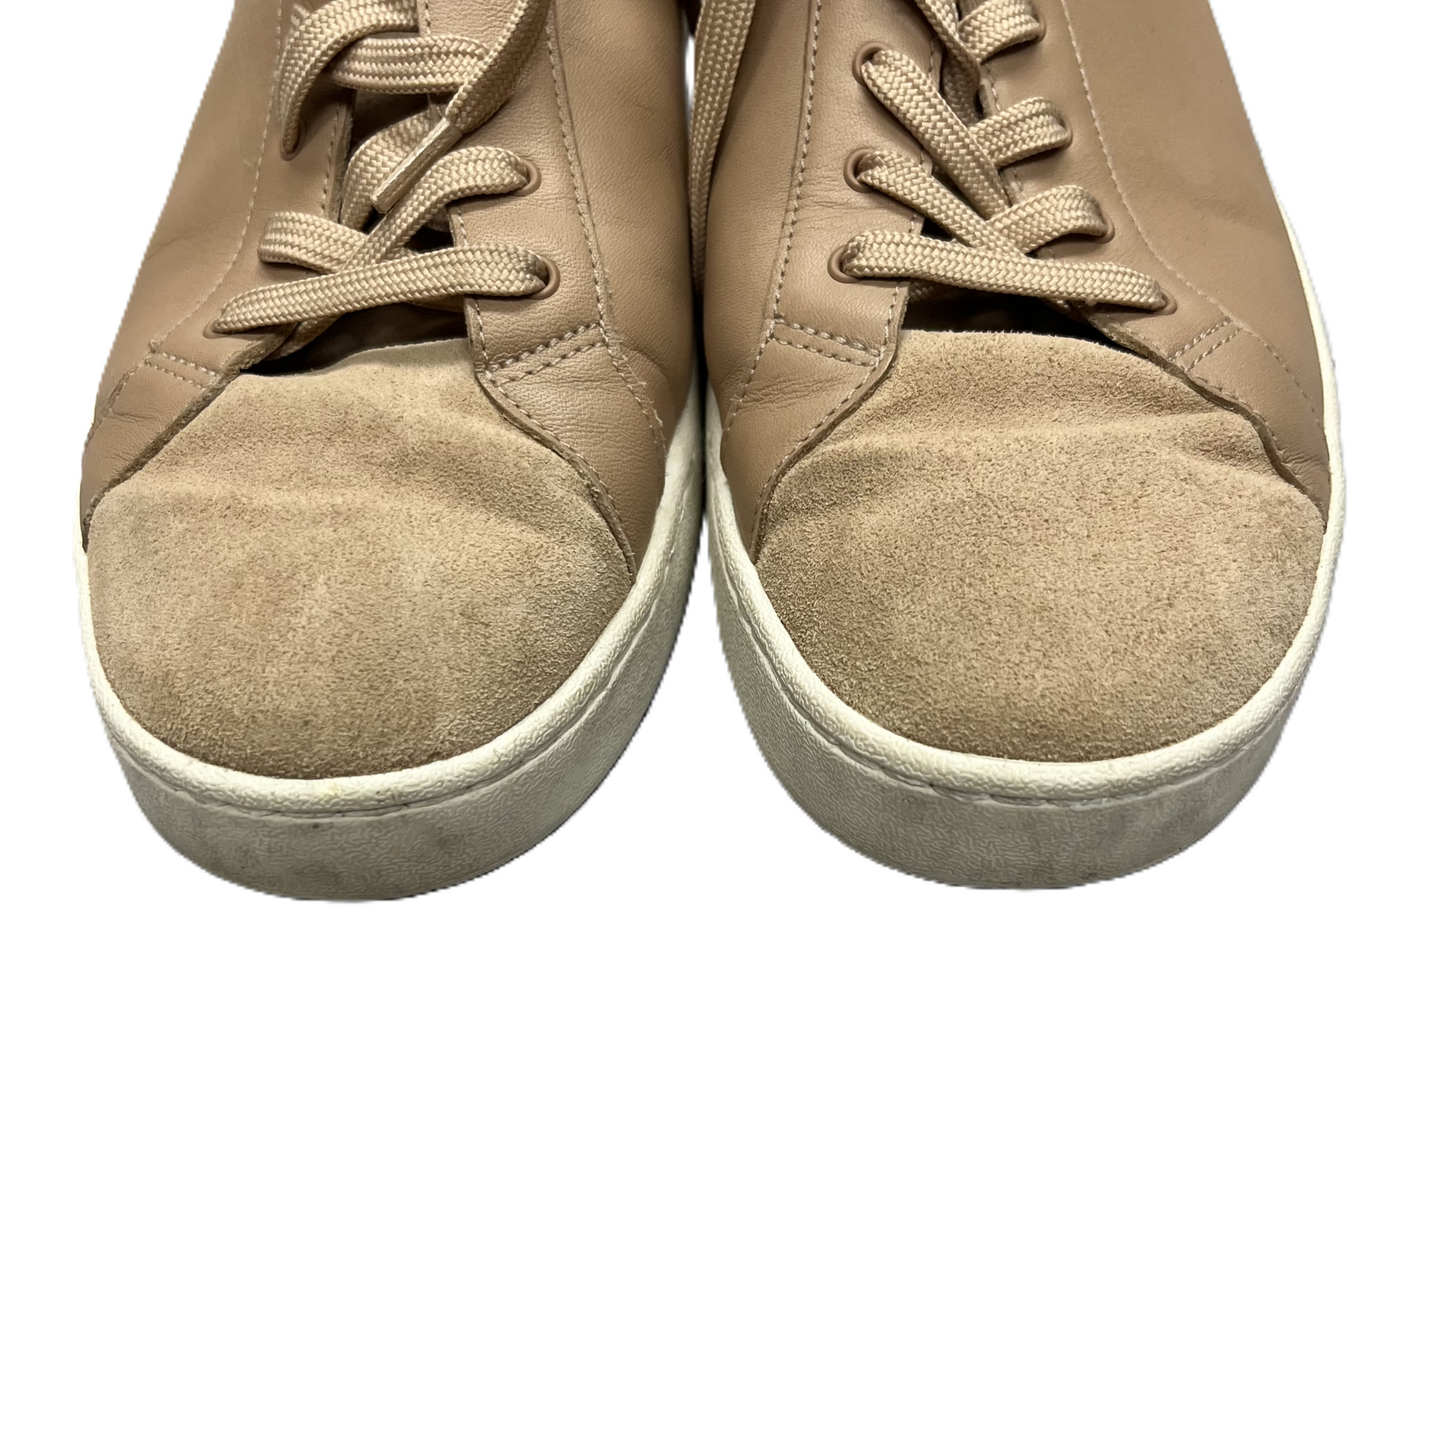 Tan Shoes Sneakers By Vince, Size: 7.5